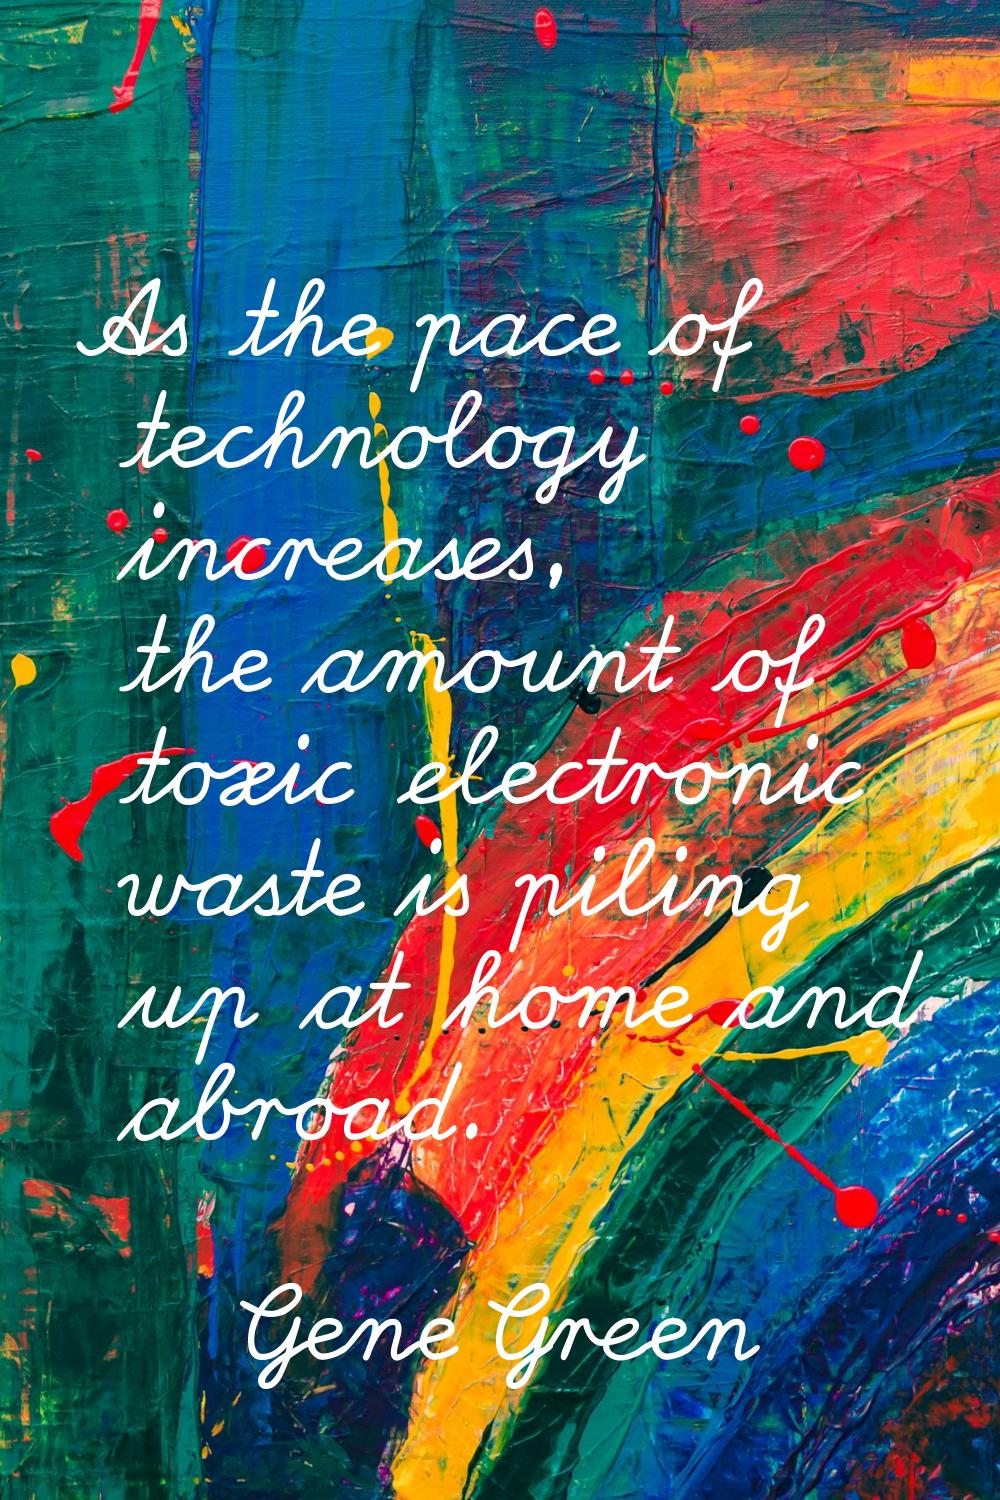 As the pace of technology increases, the amount of toxic electronic waste is piling up at home and 